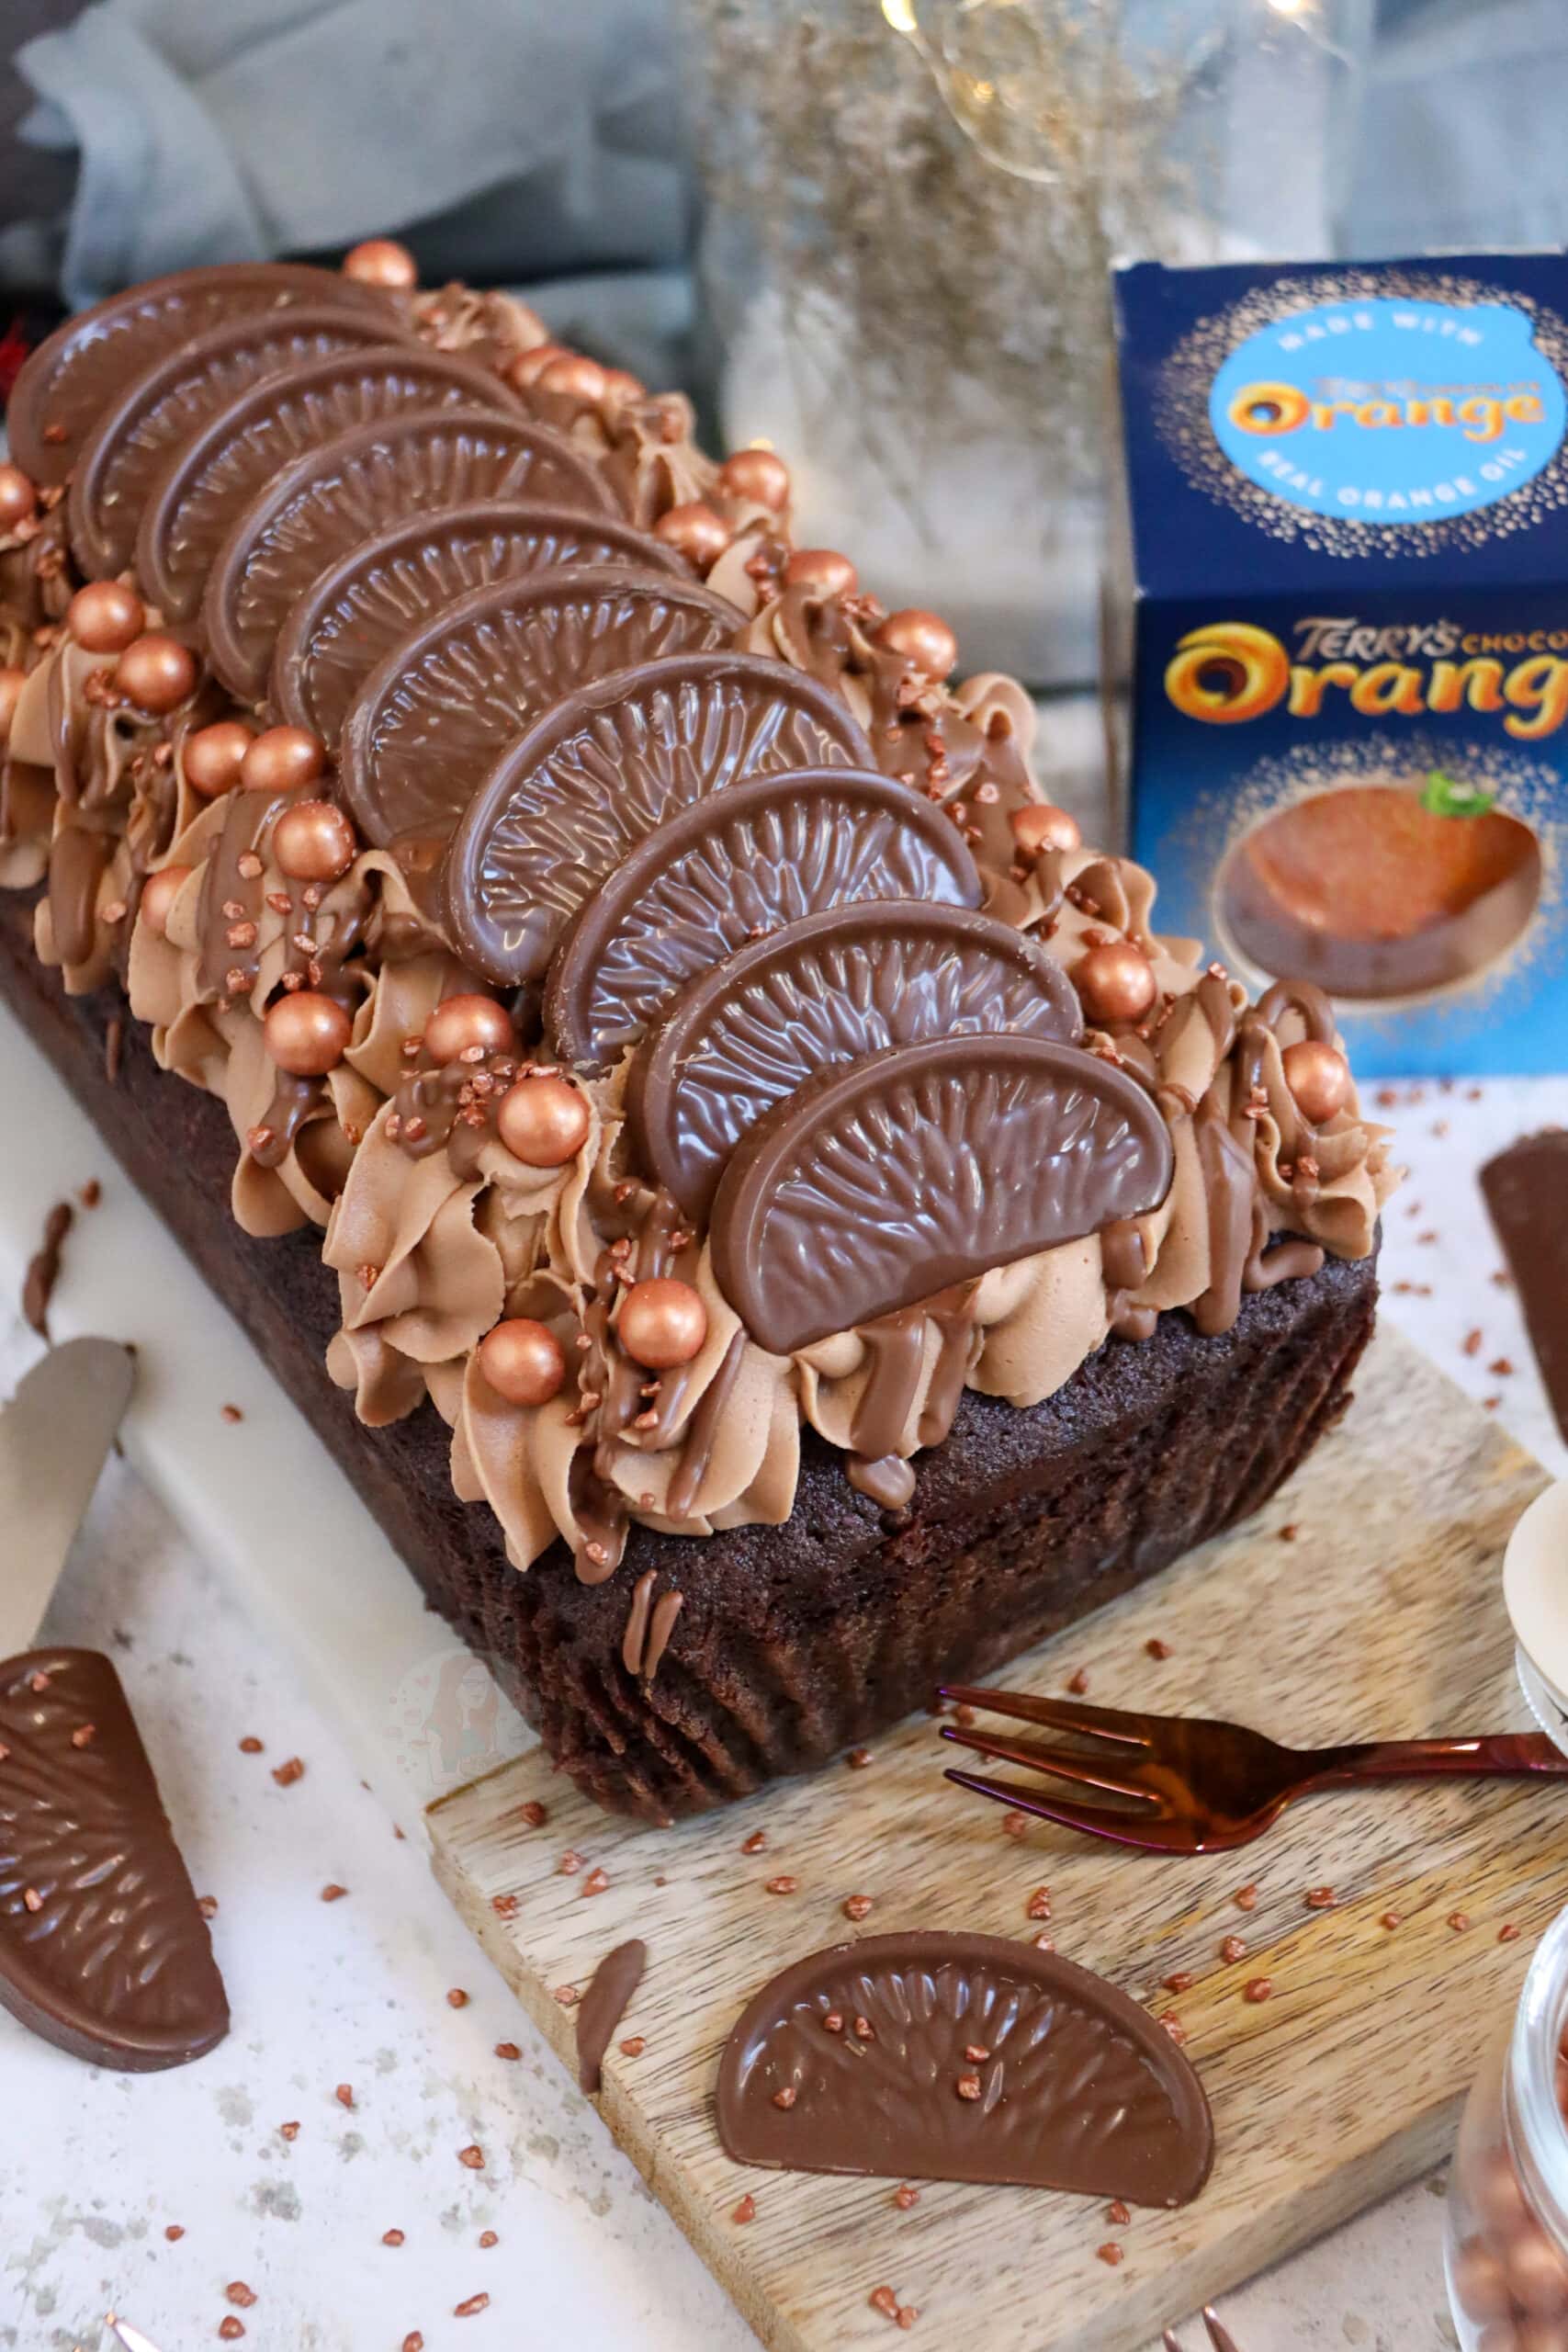 Terry's Chocolate Orange Loaf Cake! - Jane's Patisserie